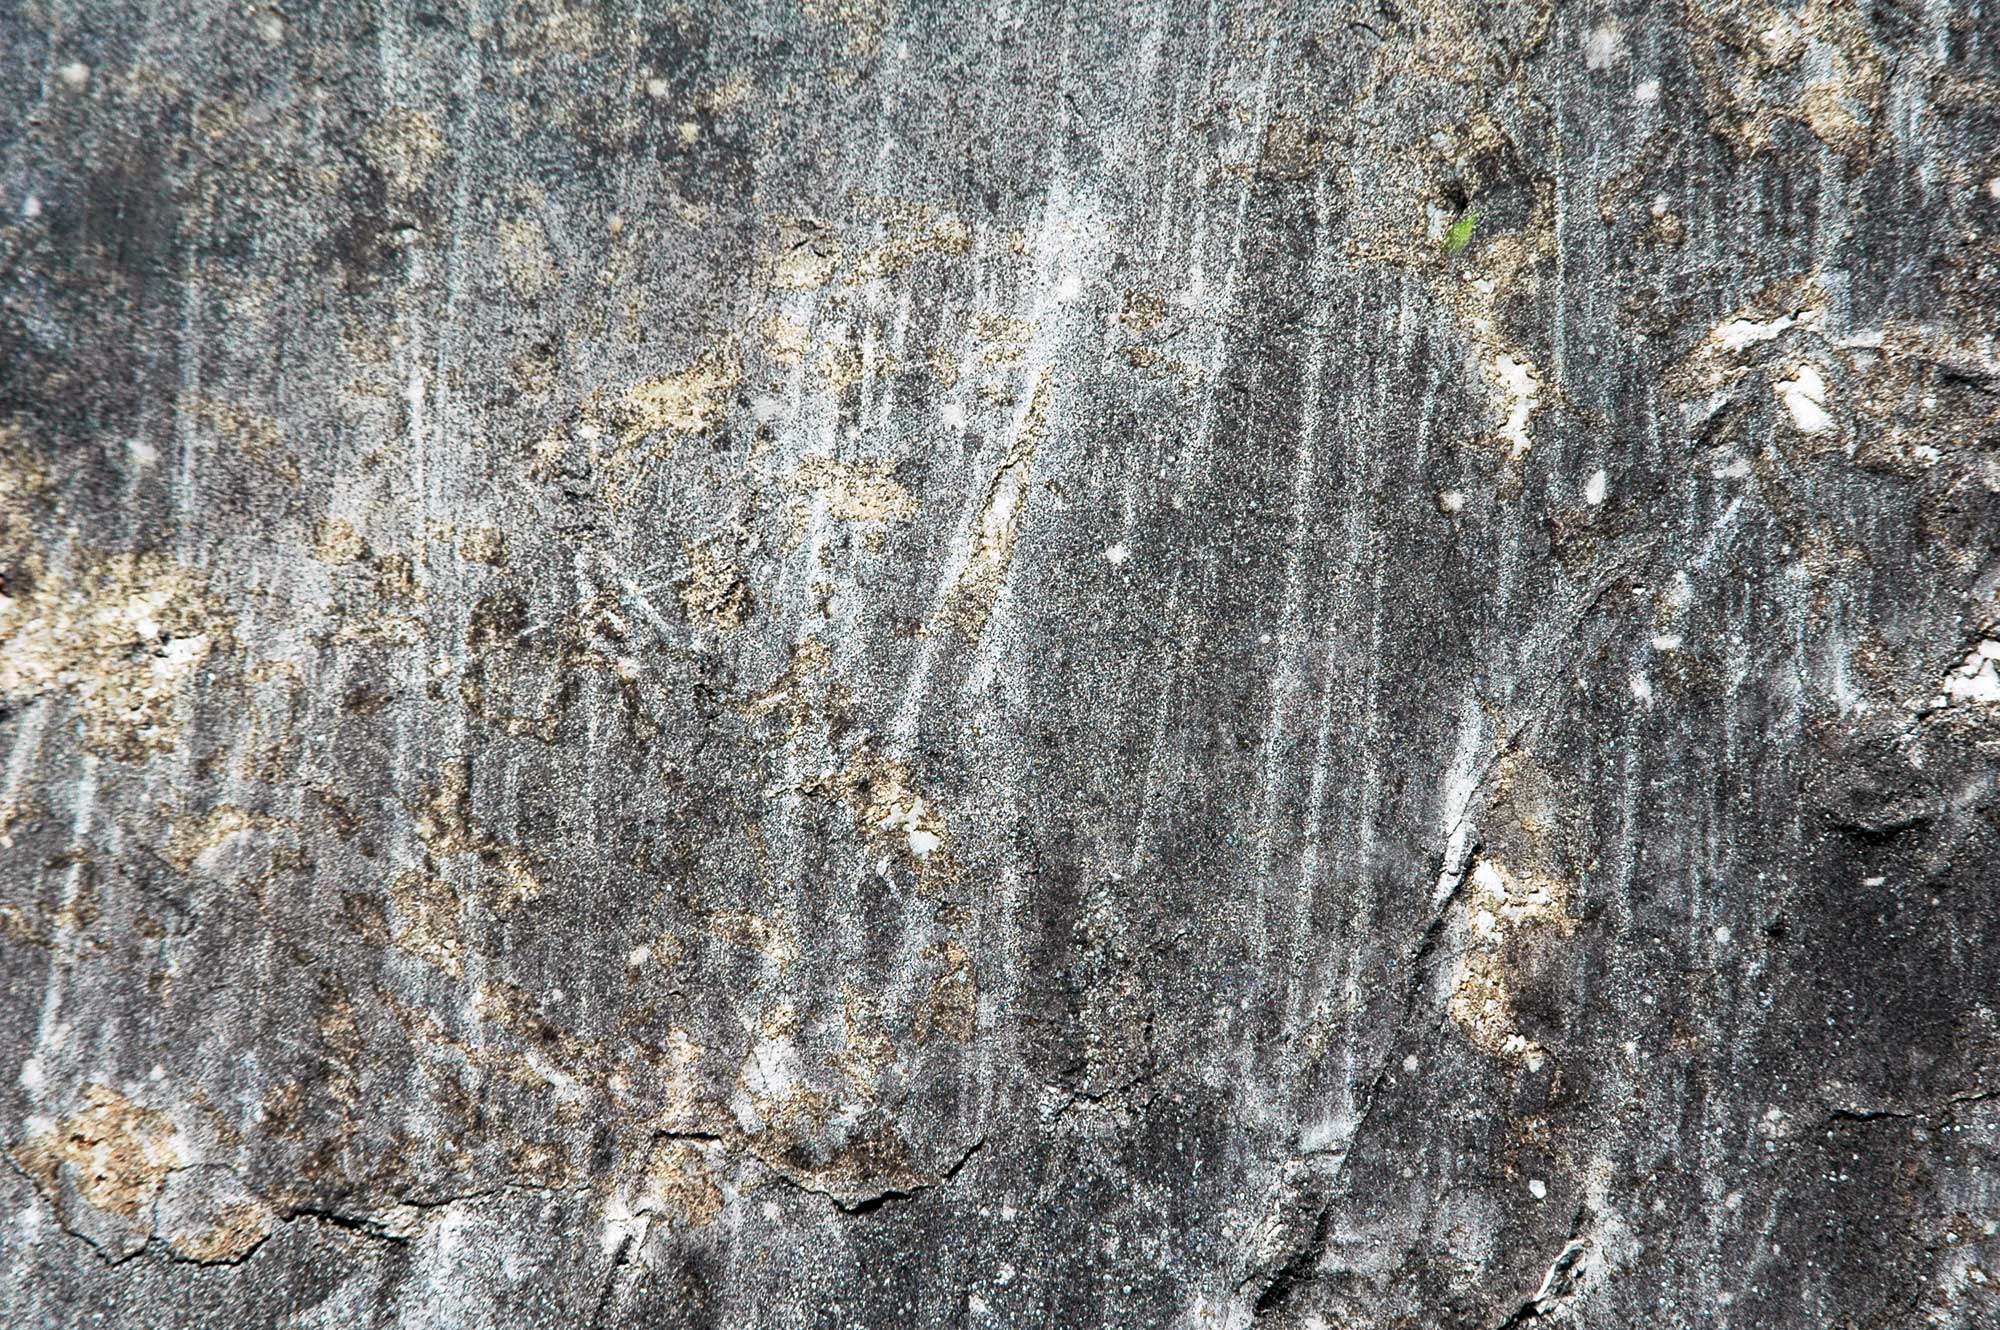 Photograph of glacial striations in dolostone in Vermont. The photo shows a beige and dark gray rock with straight, white, roughly parallel scratches on its surface.